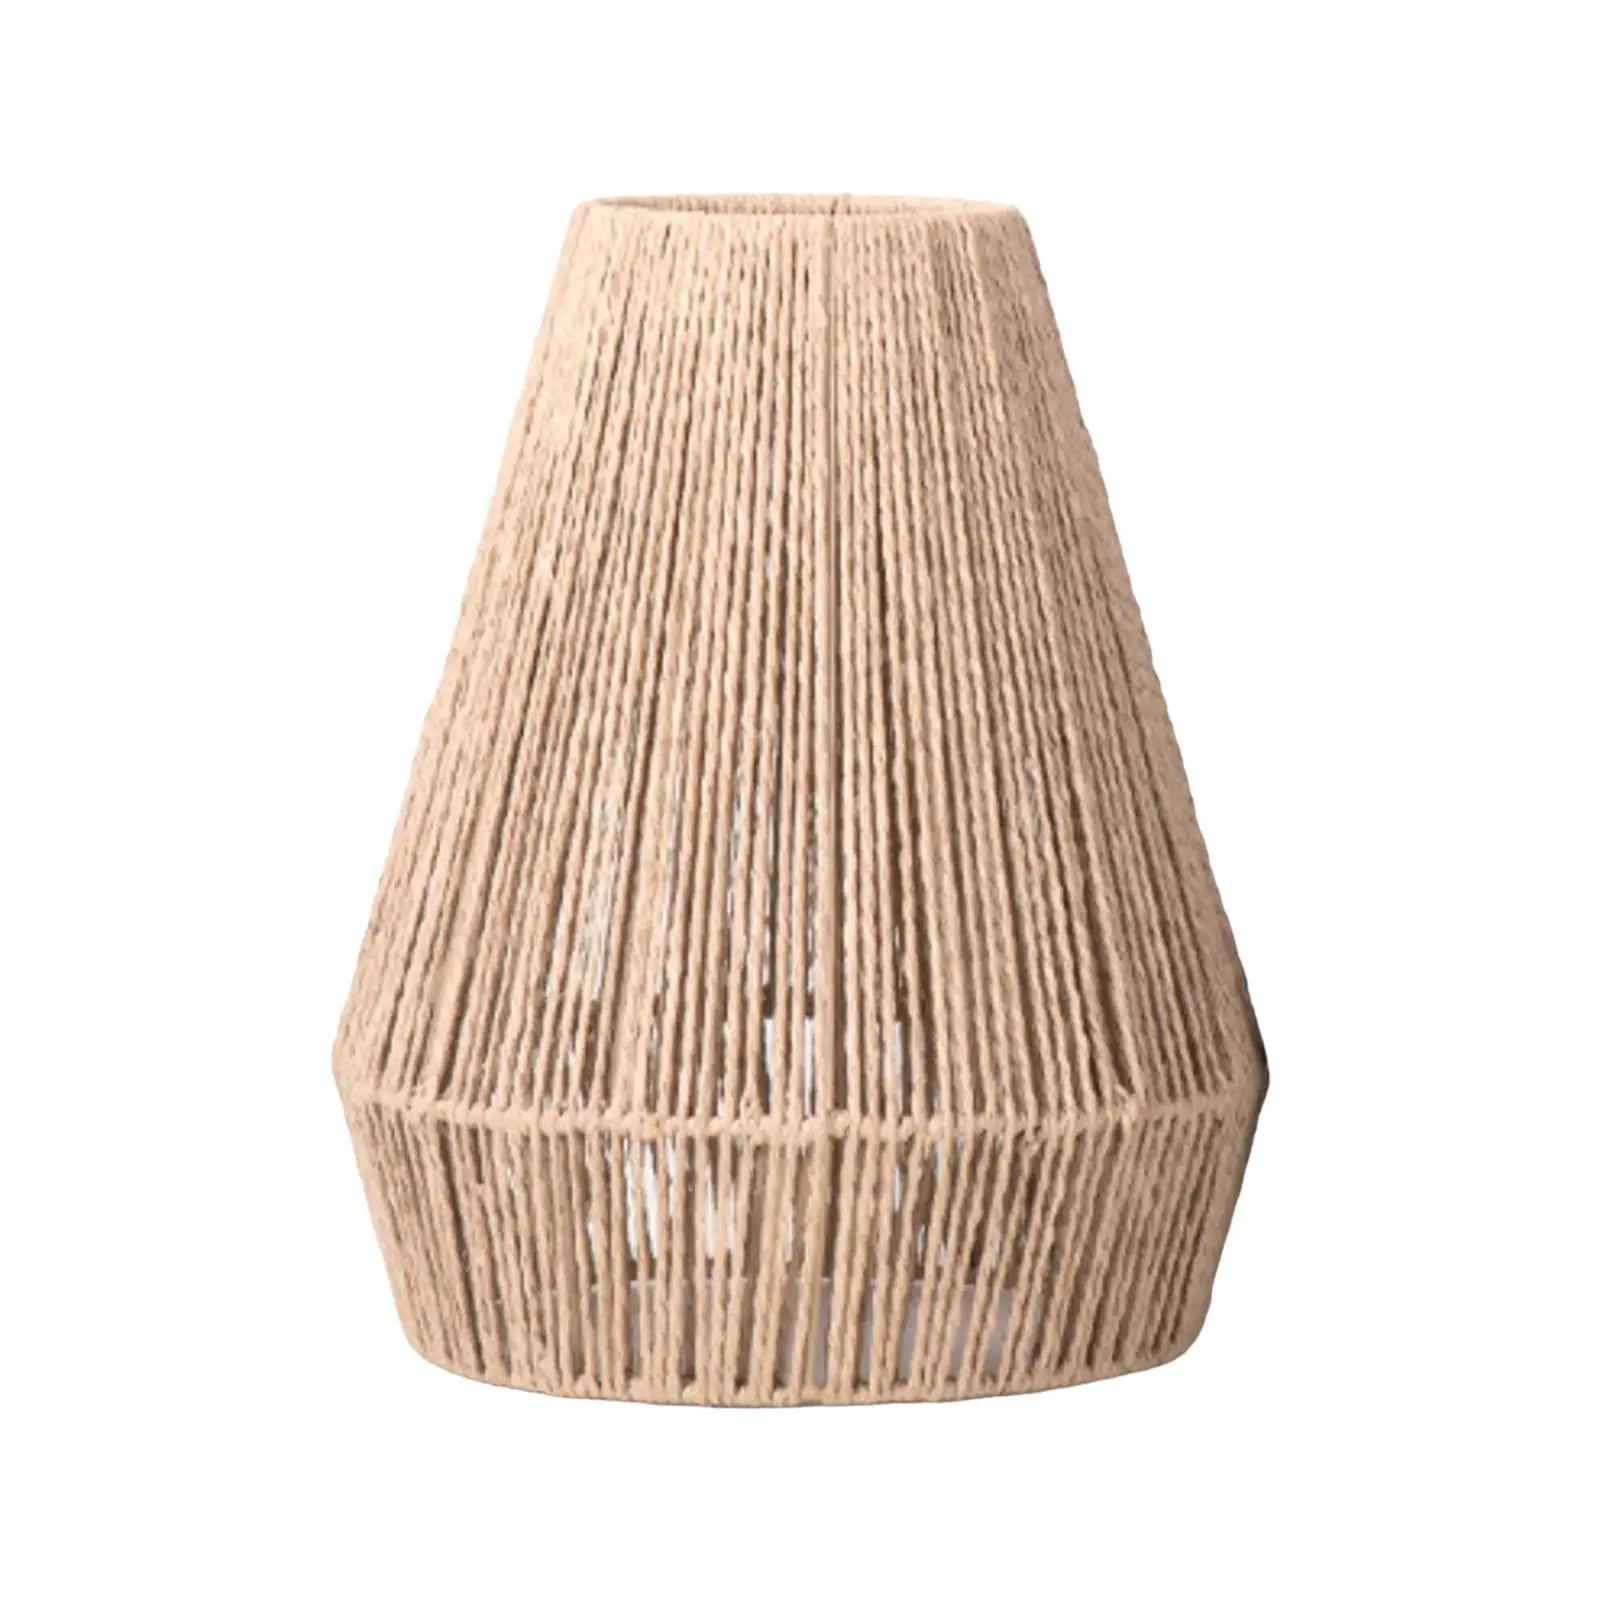 Weave Rope Lampshade Lighting Fixtures Rustic Decoration Hanging Lamp Shade for House Hallway Living Room Home Dining Room